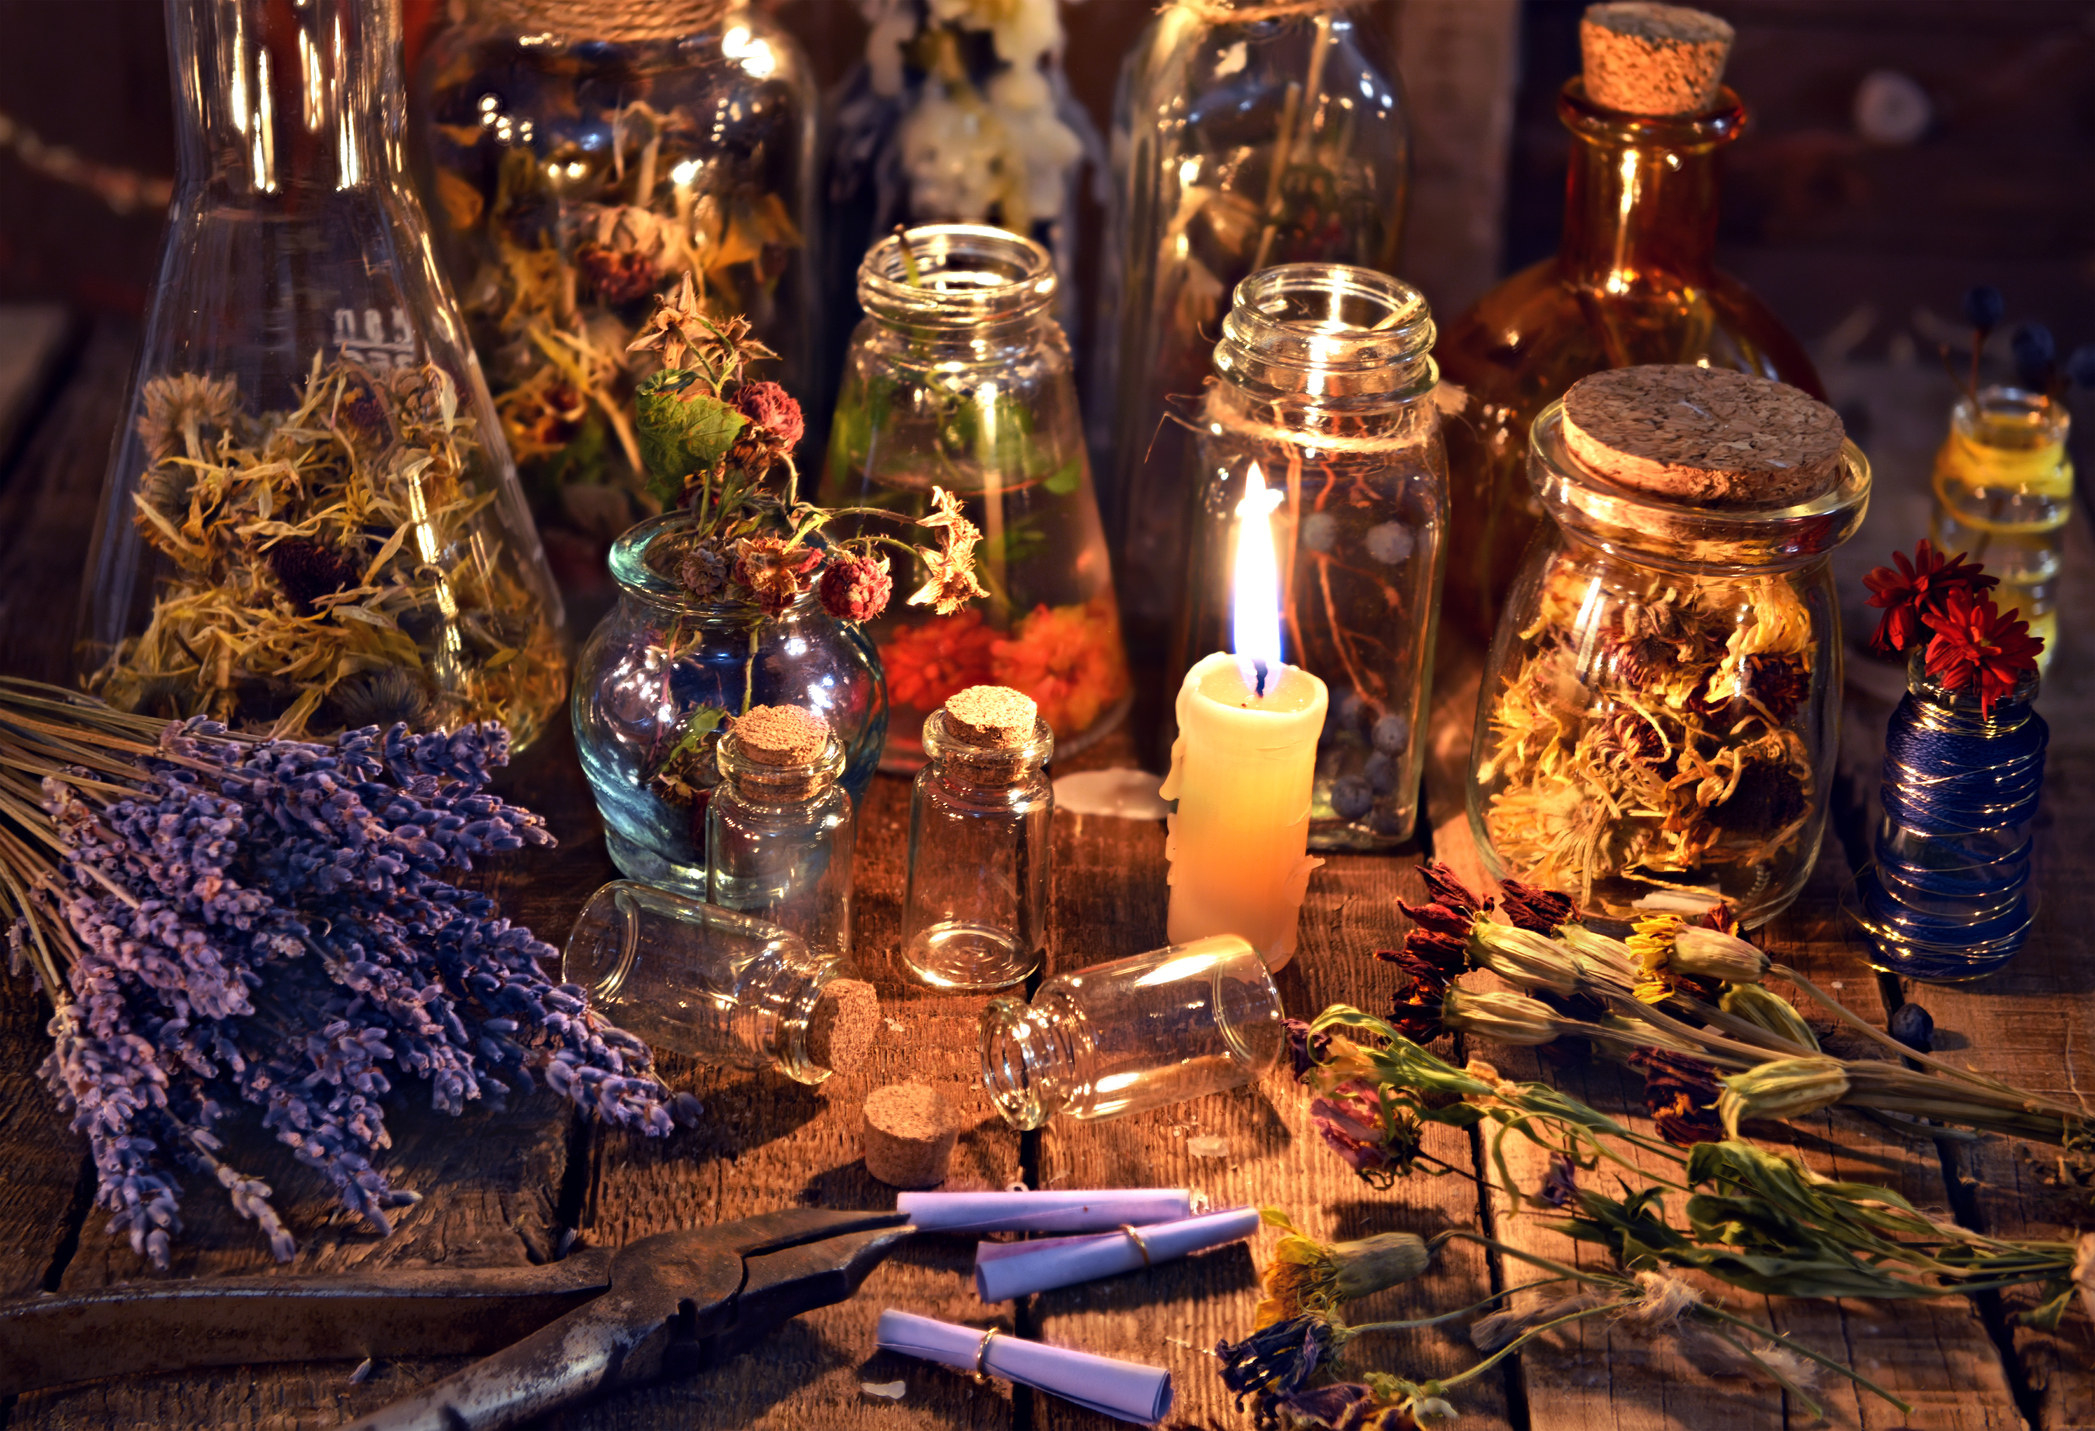 A spell table with herbs and oils